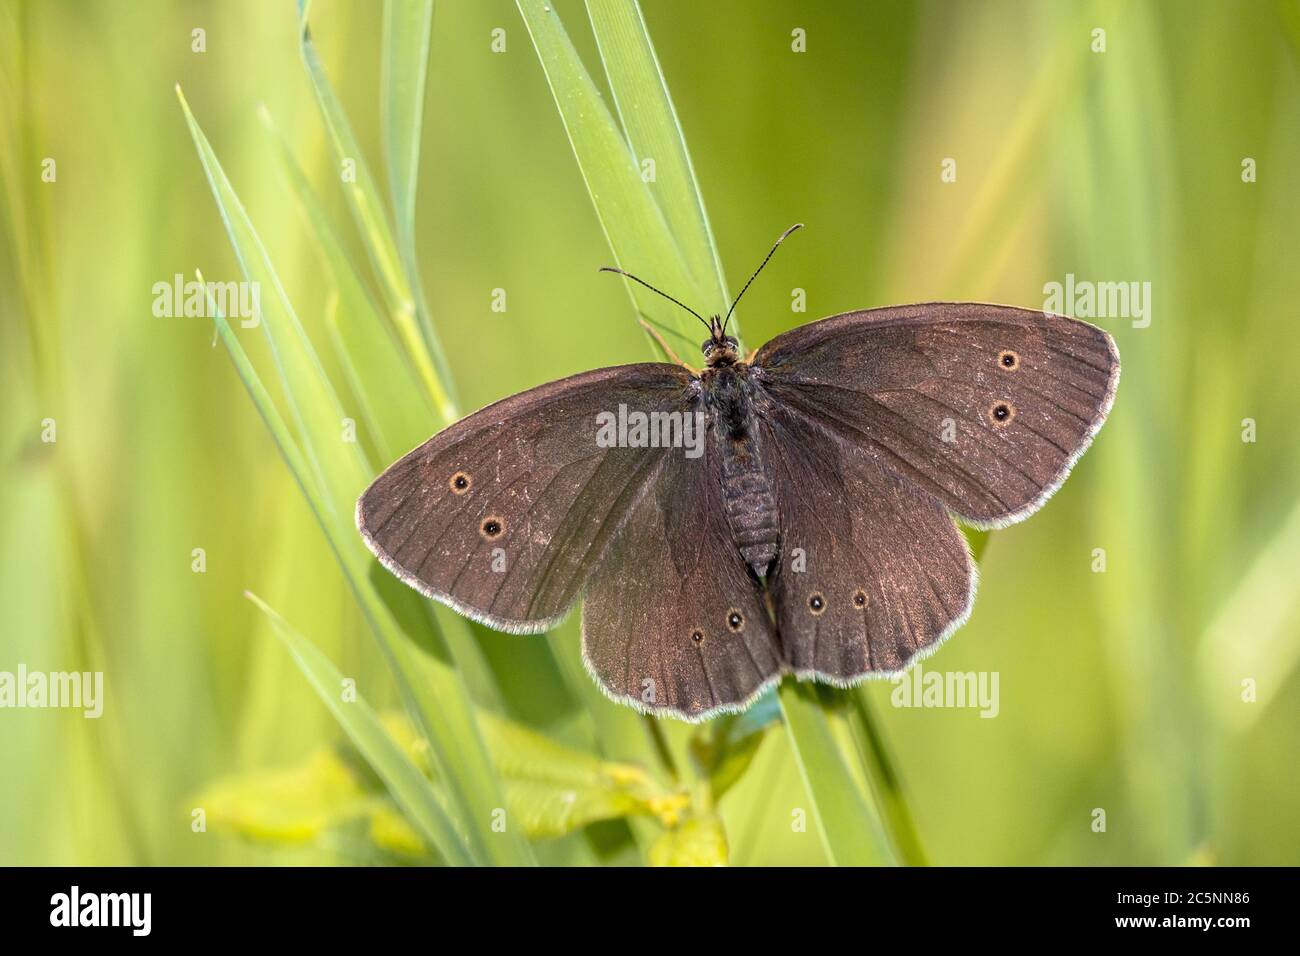 Ringlet butterfly (Aphantopus hyperantus) resting on grass with bright green background Stock Photo